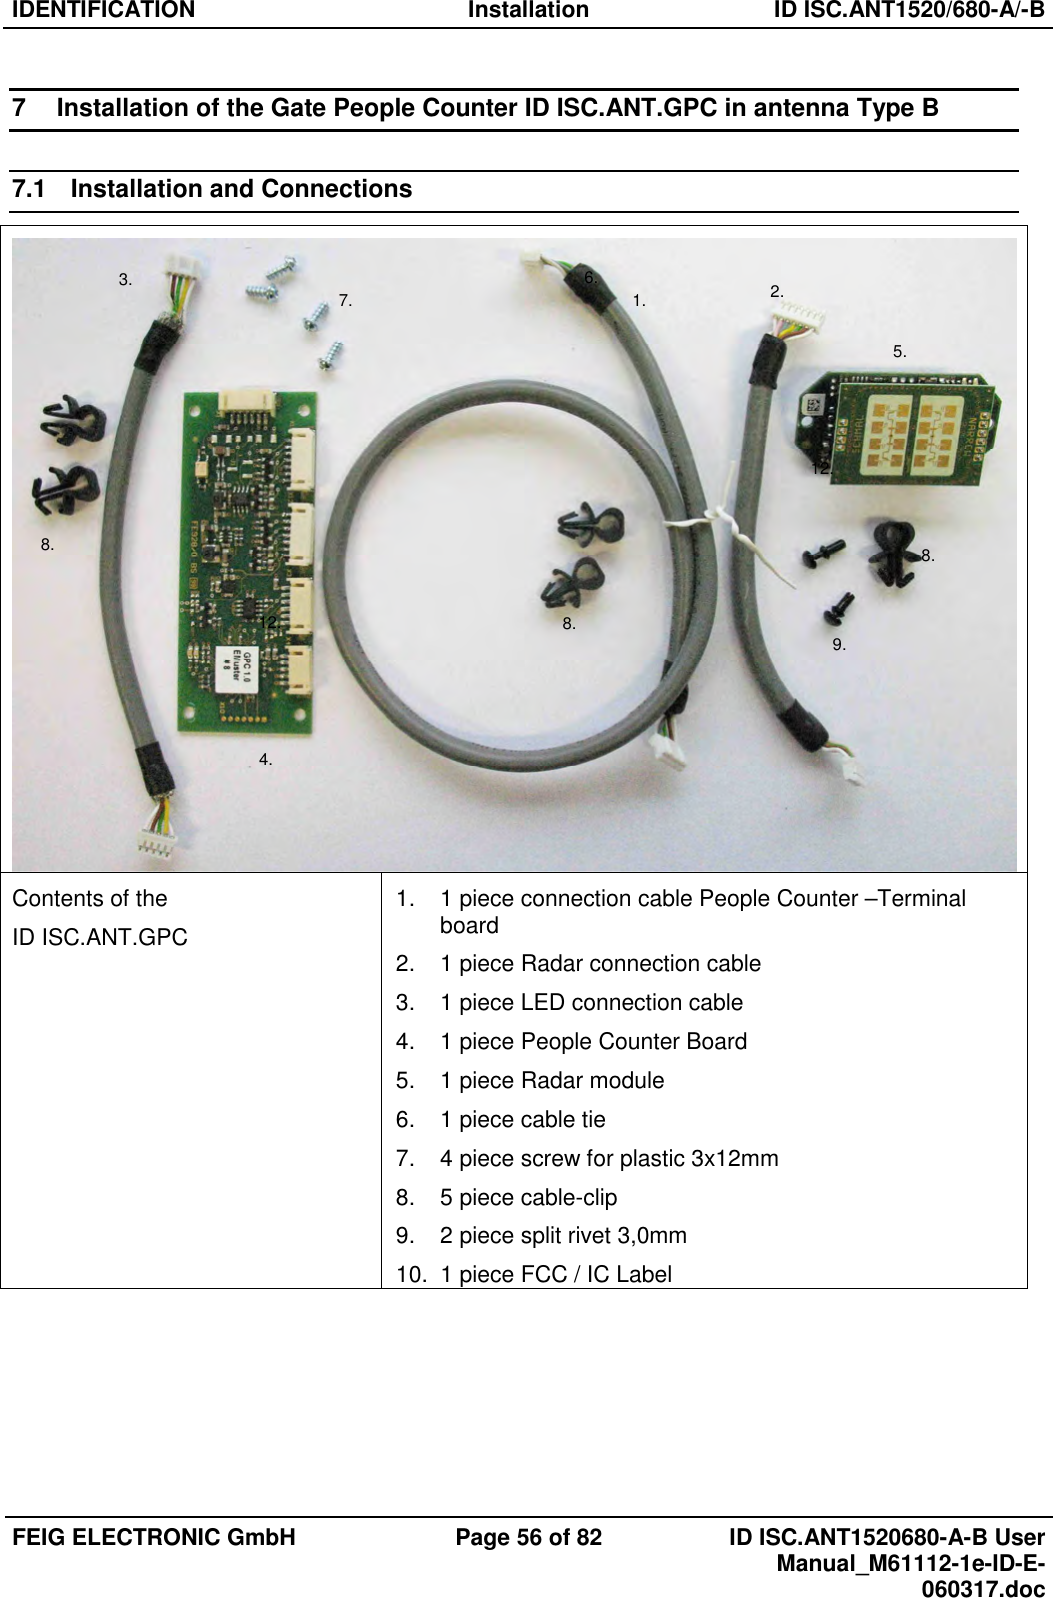 IDENTIFICATION  Installation  ID ISC.ANT1520/680-A/-B  FEIG ELECTRONIC GmbH  Page 56 of 82  ID ISC.ANT1520680-A-B User Manual_M61112-1e-ID-E-060317.doc  7  Installation of the Gate People Counter ID ISC.ANT.GPC in antenna Type B 7.1  Installation and Connections  Contents of the ID ISC.ANT.GPC 1.  1 piece connection cable People Counter –Terminal board 2.  1 piece Radar connection cable 3.  1 piece LED connection cable 4.  1 piece People Counter Board 5.  1 piece Radar module 6.  1 piece cable tie 7.  4 piece screw for plastic 3x12mm 8.  5 piece cable-clip 9.  2 piece split rivet 3,0mm 10.  1 piece FCC / IC Label     2. 1. 3. 4. 5. 6. 7. 8. 9. 12. 12. 8. 8. 